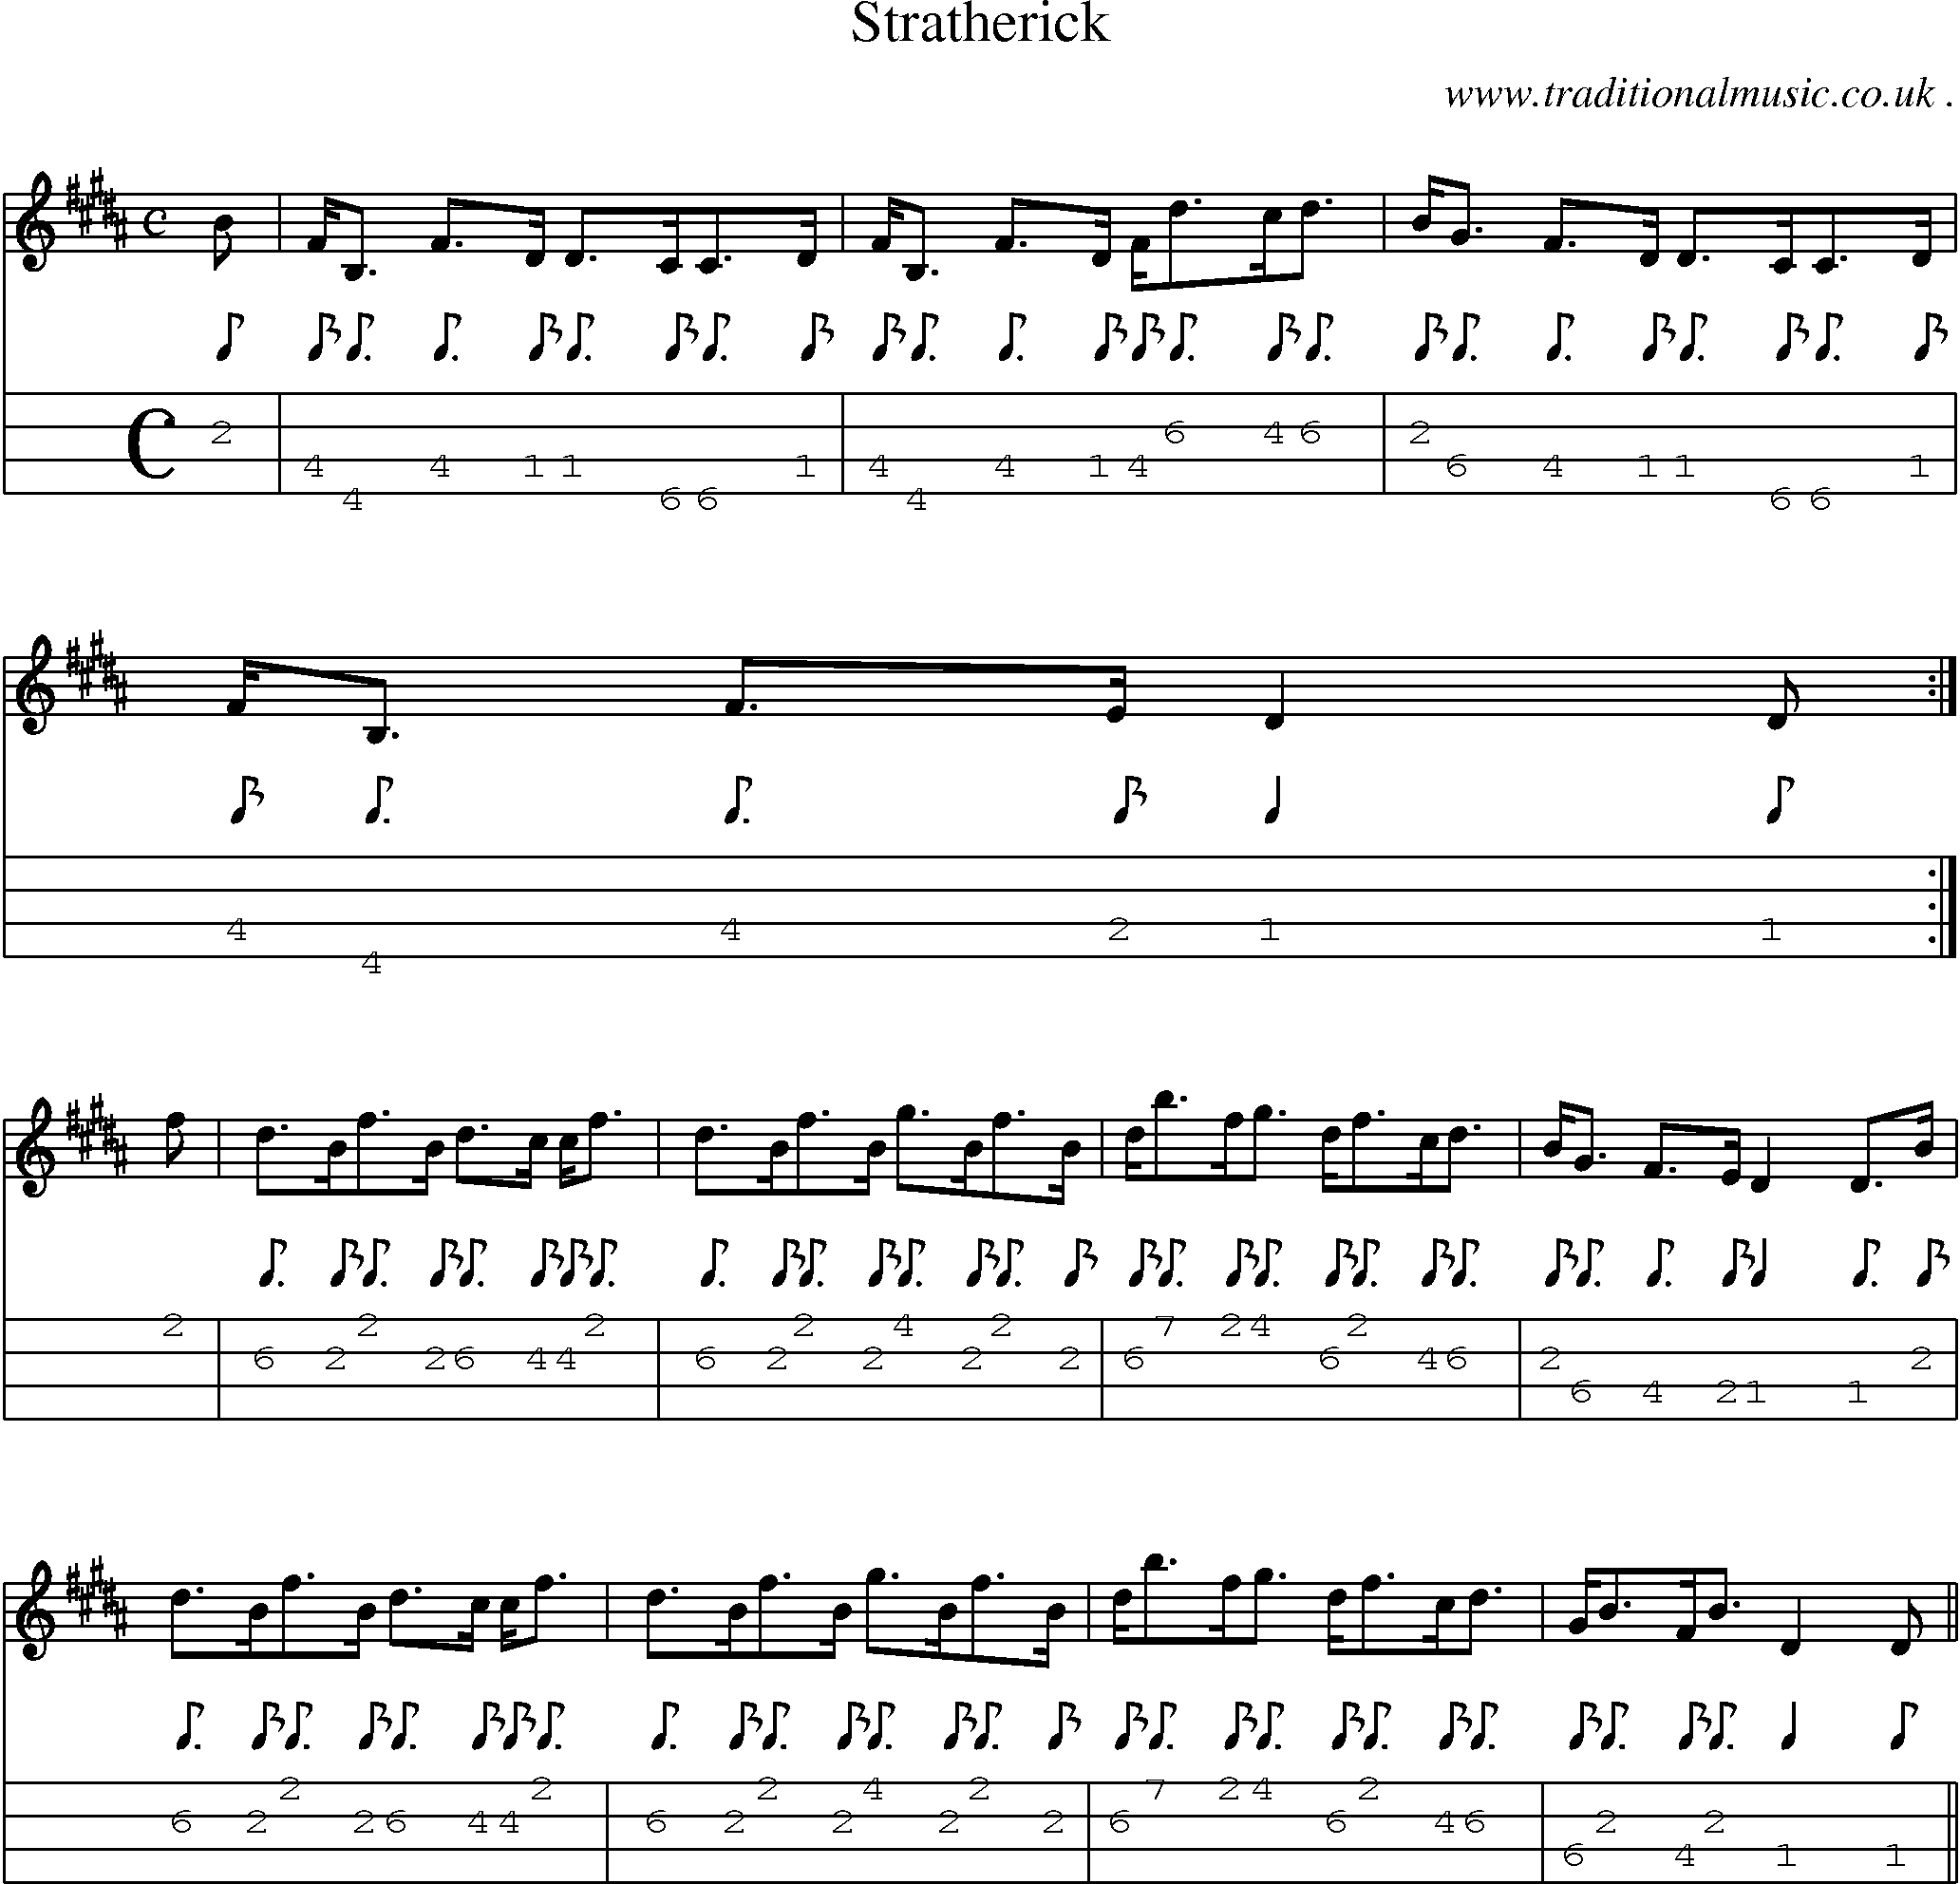 Sheet-music  score, Chords and Mandolin Tabs for Stratherick